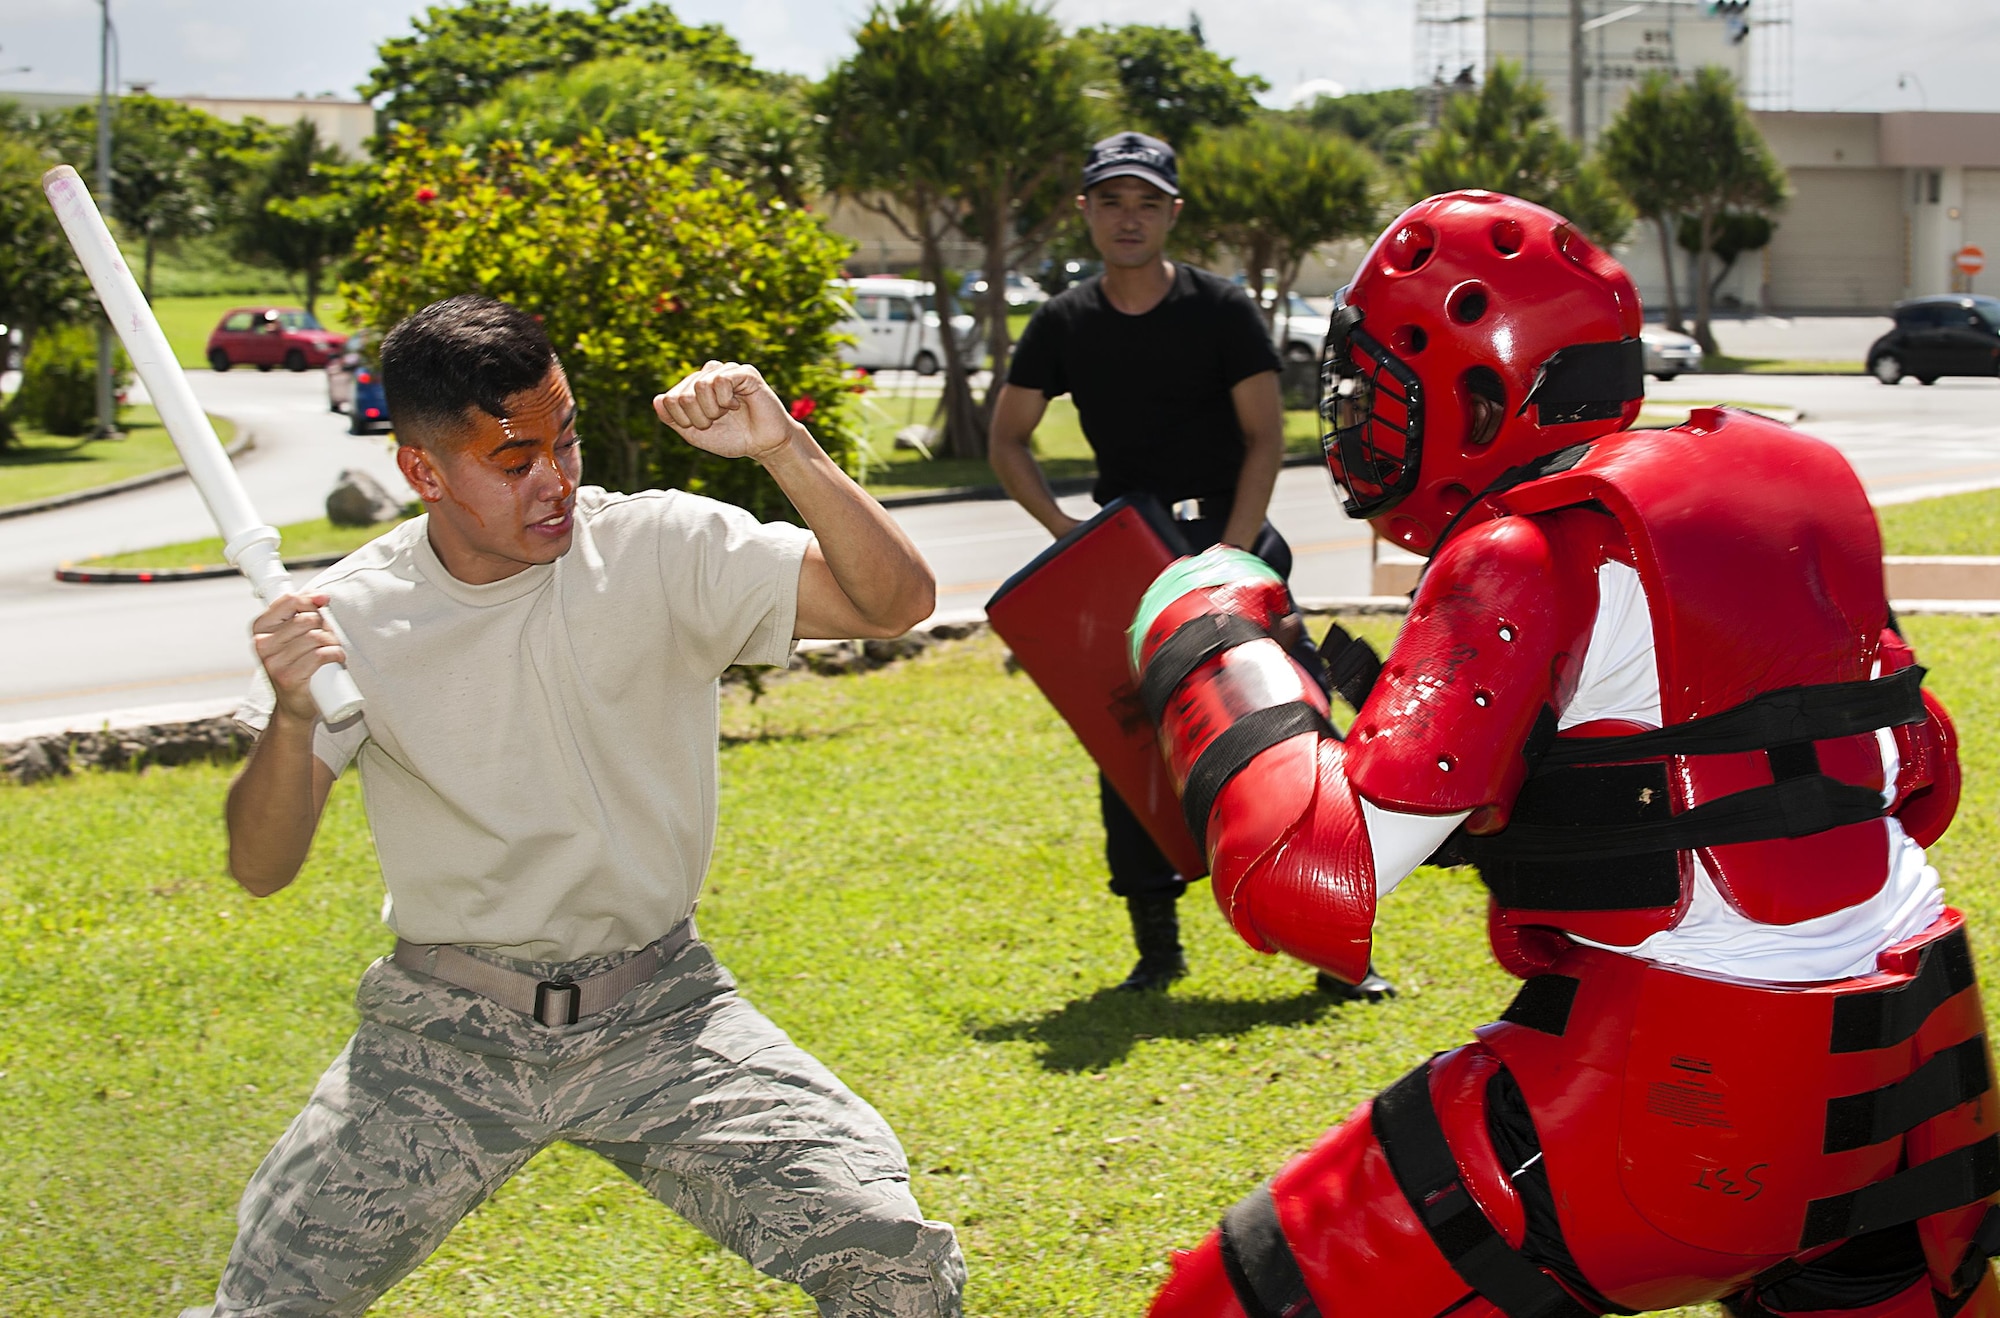 U.S. Air Force Airman Joshua Lenaire, 18th Security Forces Squadron response force member, uses a training baton to subdue an attacker in a red-man suit after being sprayed with OC spray during training July 13, 2016, at Kadena Air Base, Japan. Every SFS member must train to use OC spray by getting sprayed and completing an obstacle course. (U.S. Air Force photo by Airman 1st Class Corey M. Pettis)